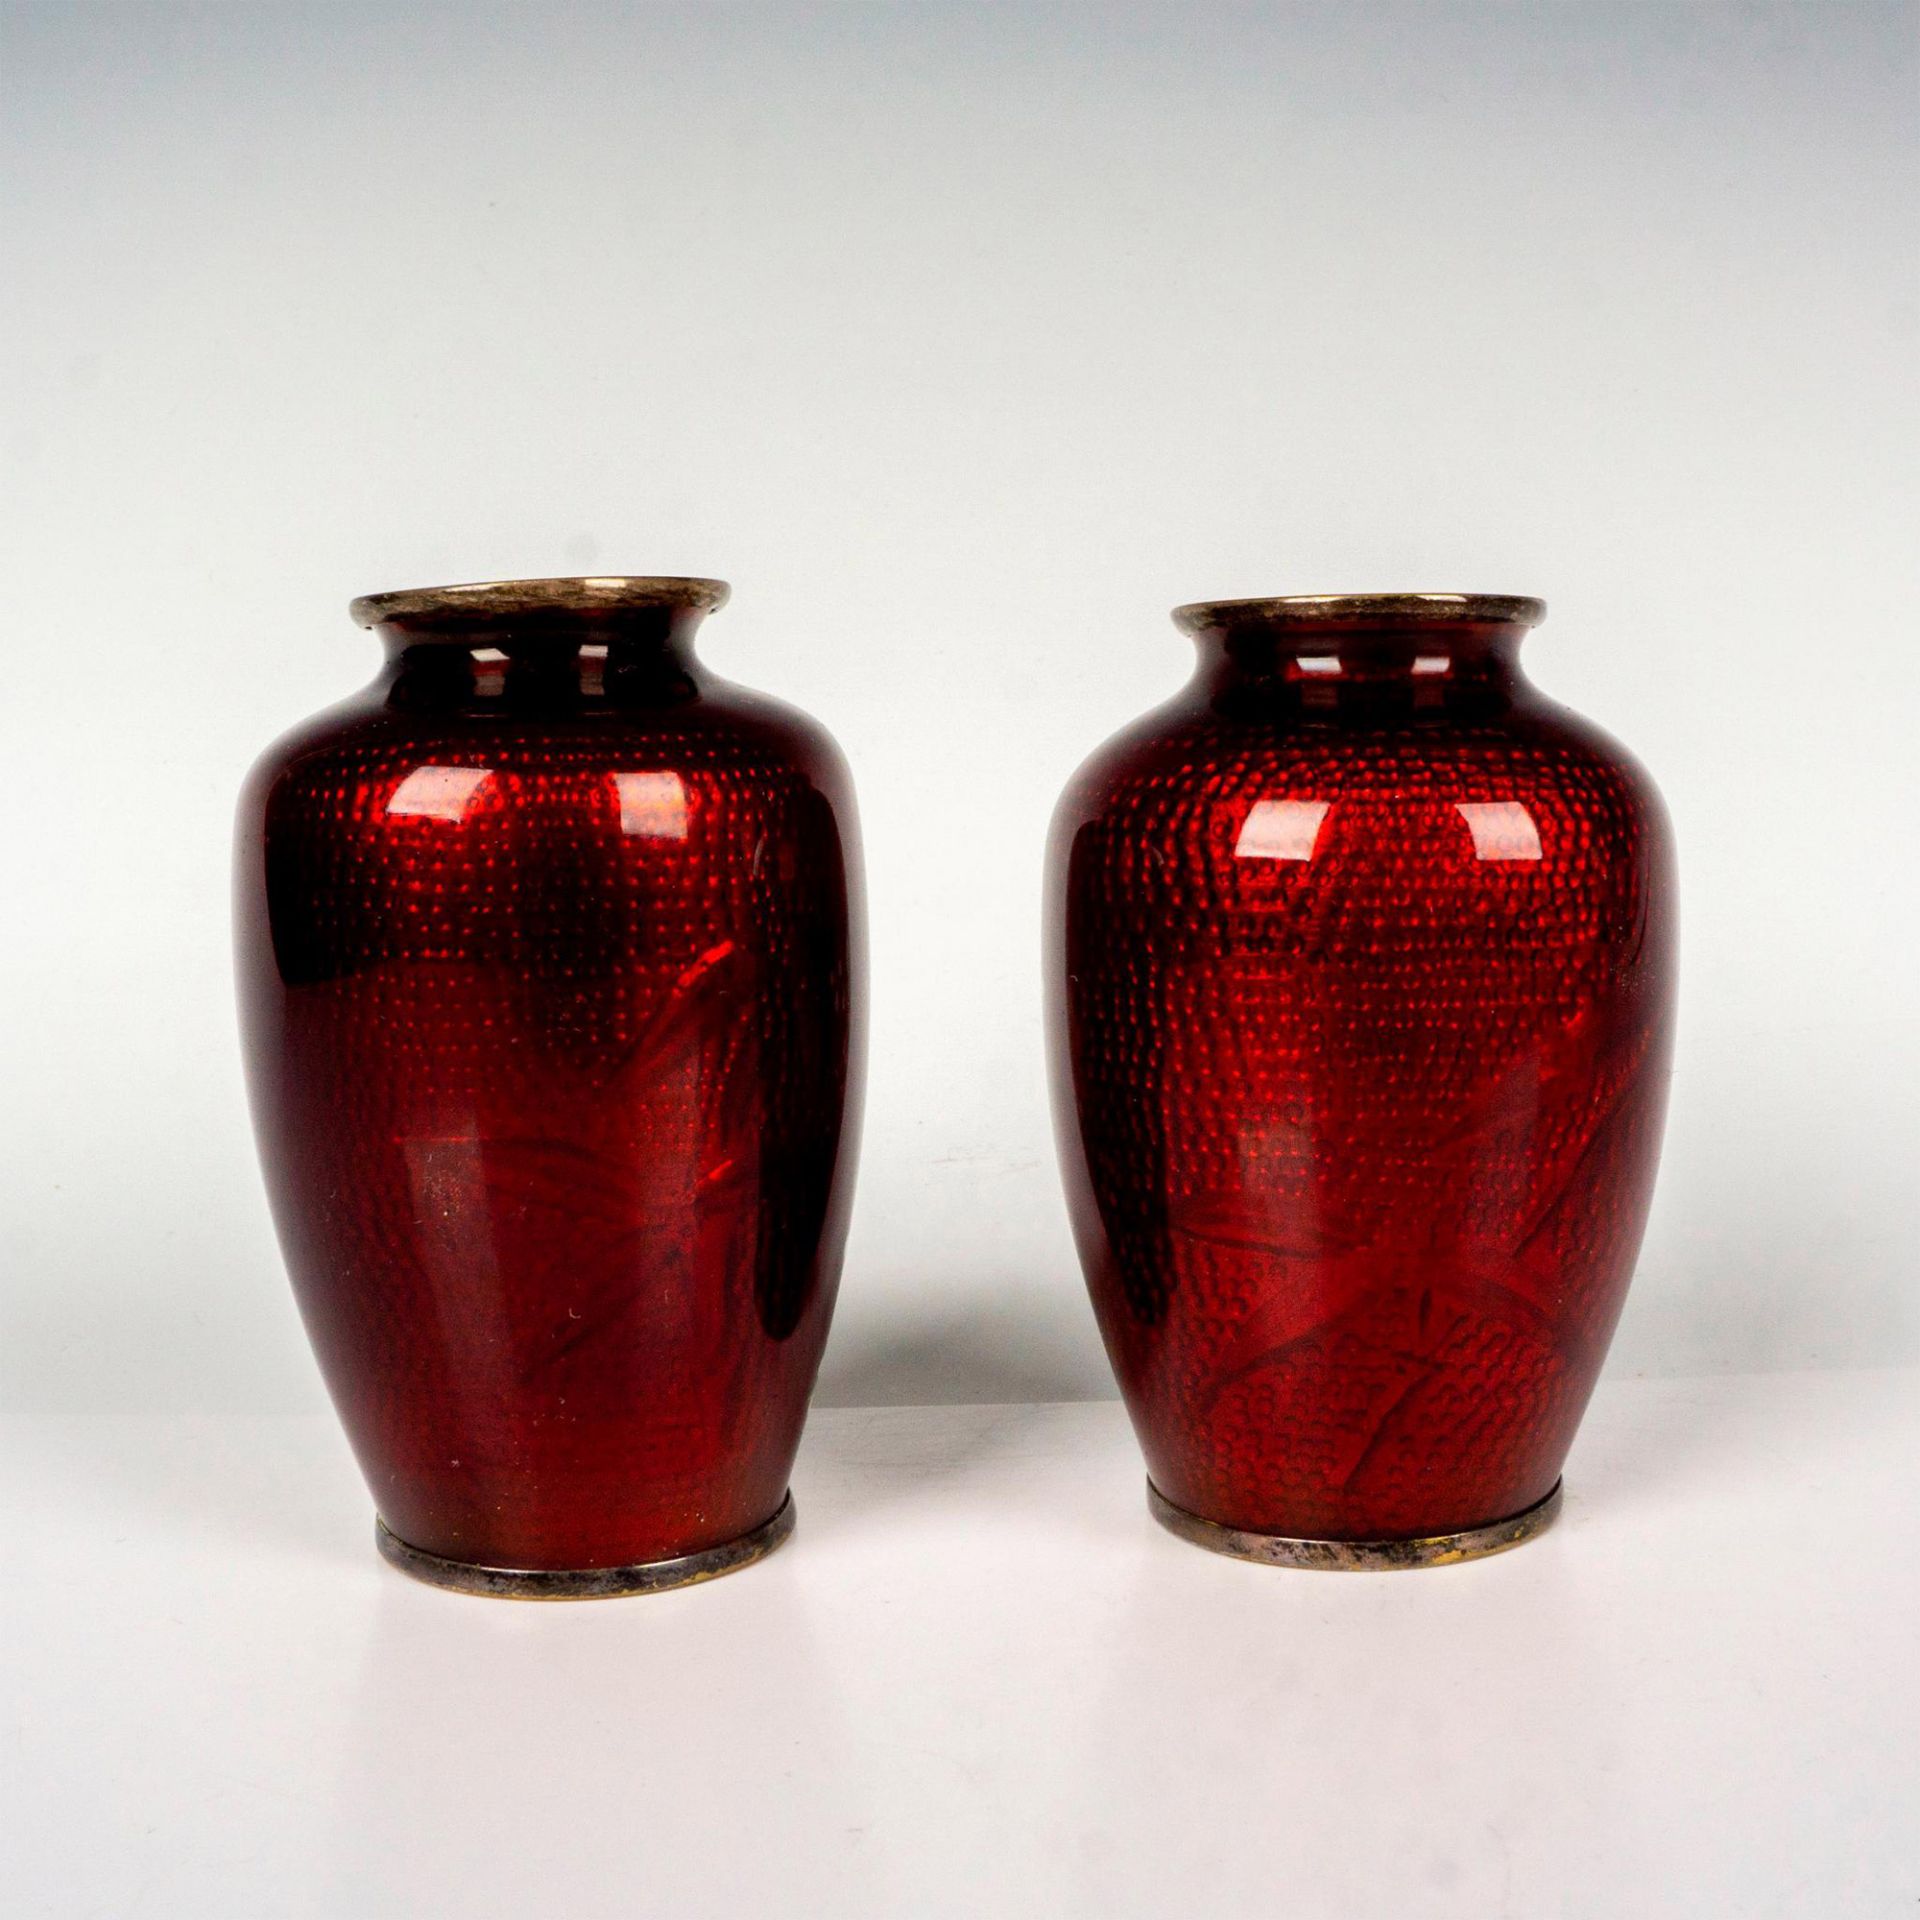 Pair of Japanese Cloisonne Vases - Image 2 of 3